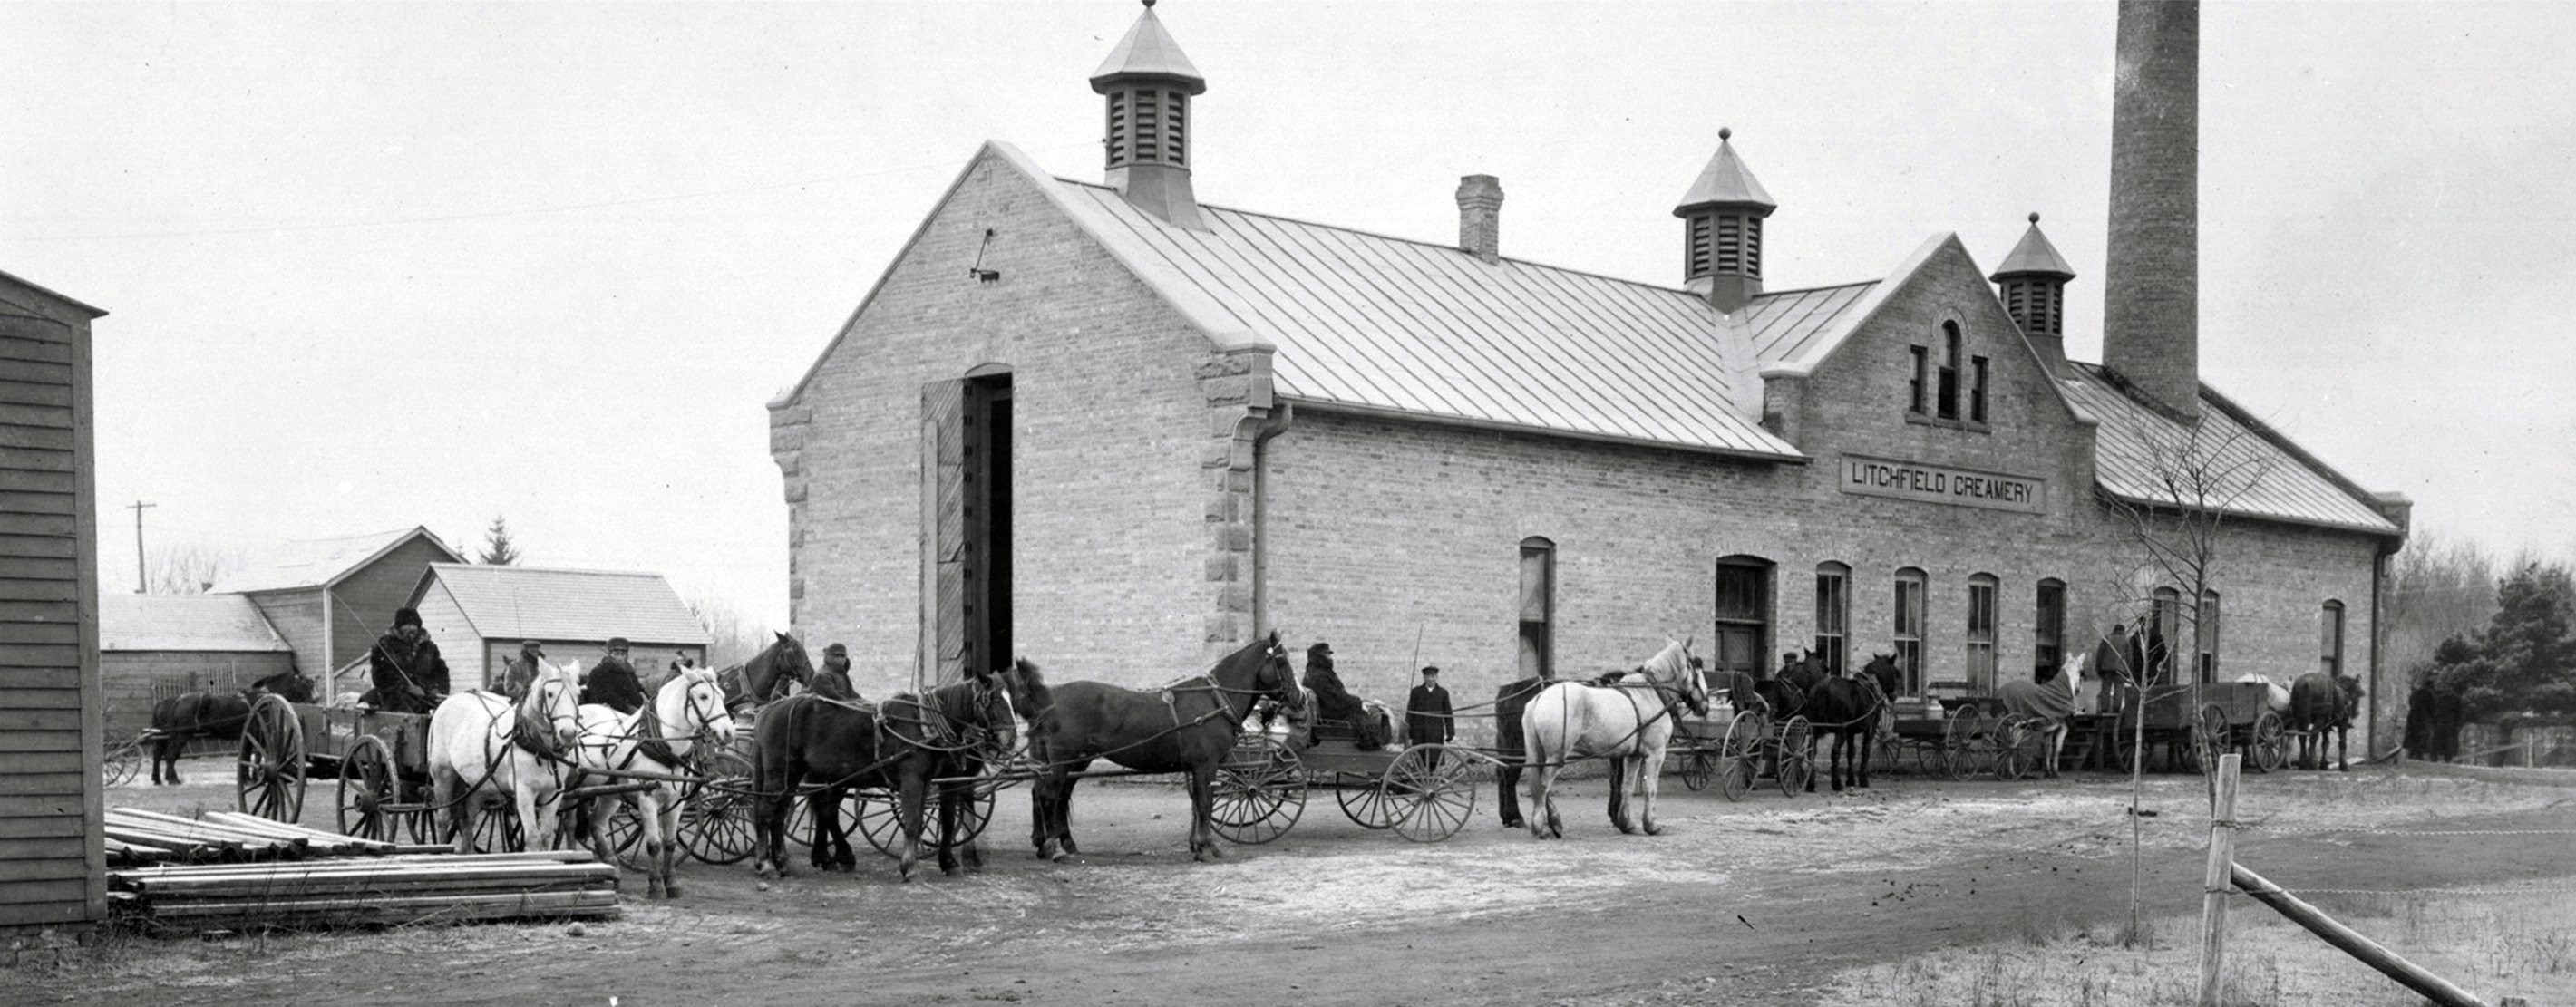 An Old Photograph Of A Land O'Lakes Creamery In Minnesota